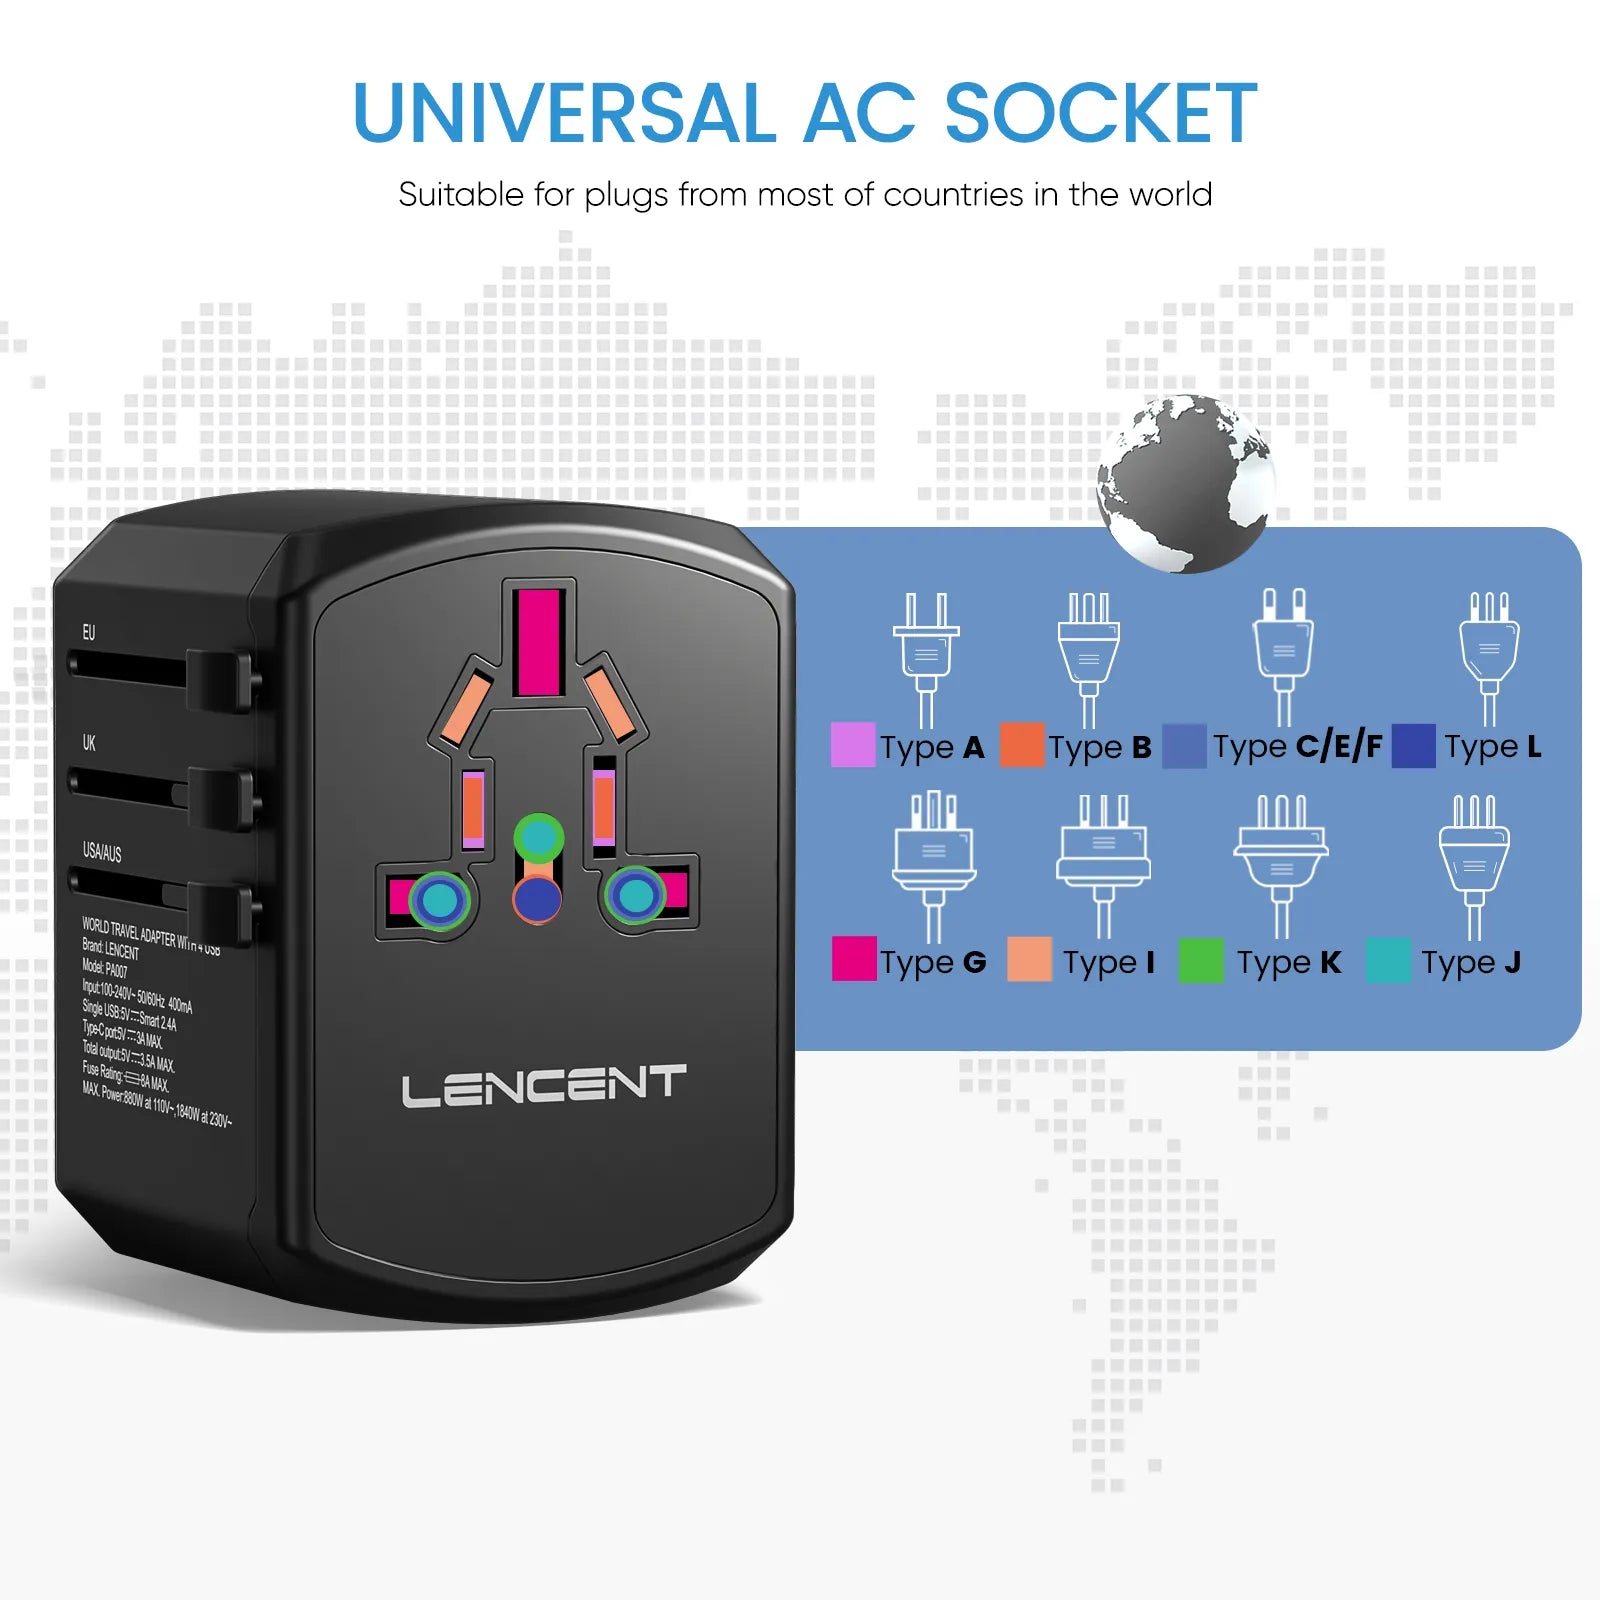 Universal Travel Adapter - Your All-in-One Charger